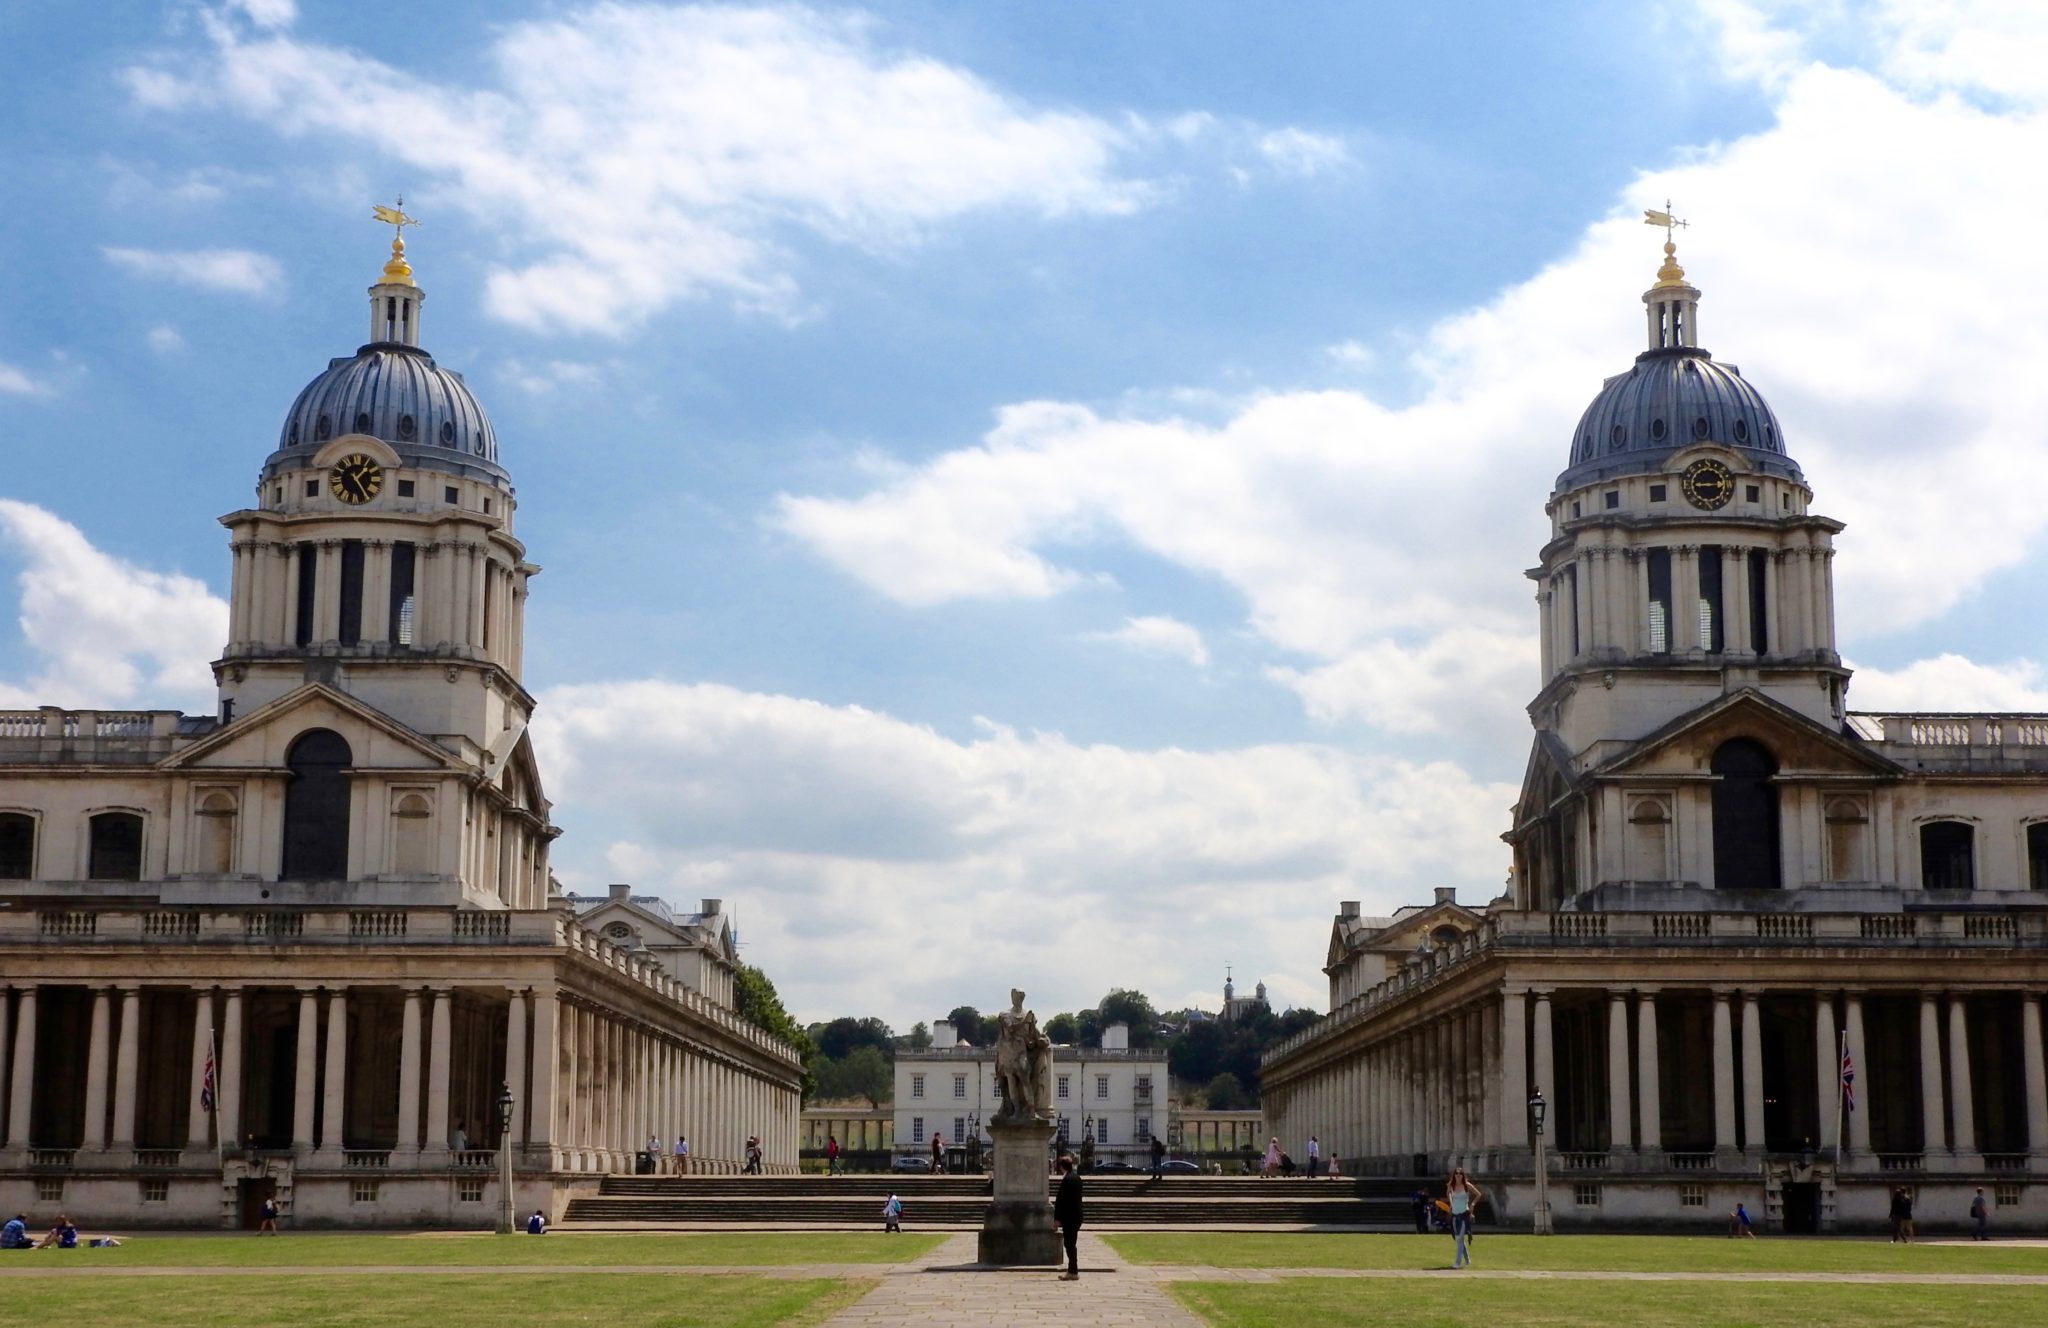 The Old Royal Naval College Maritime Greenwich England